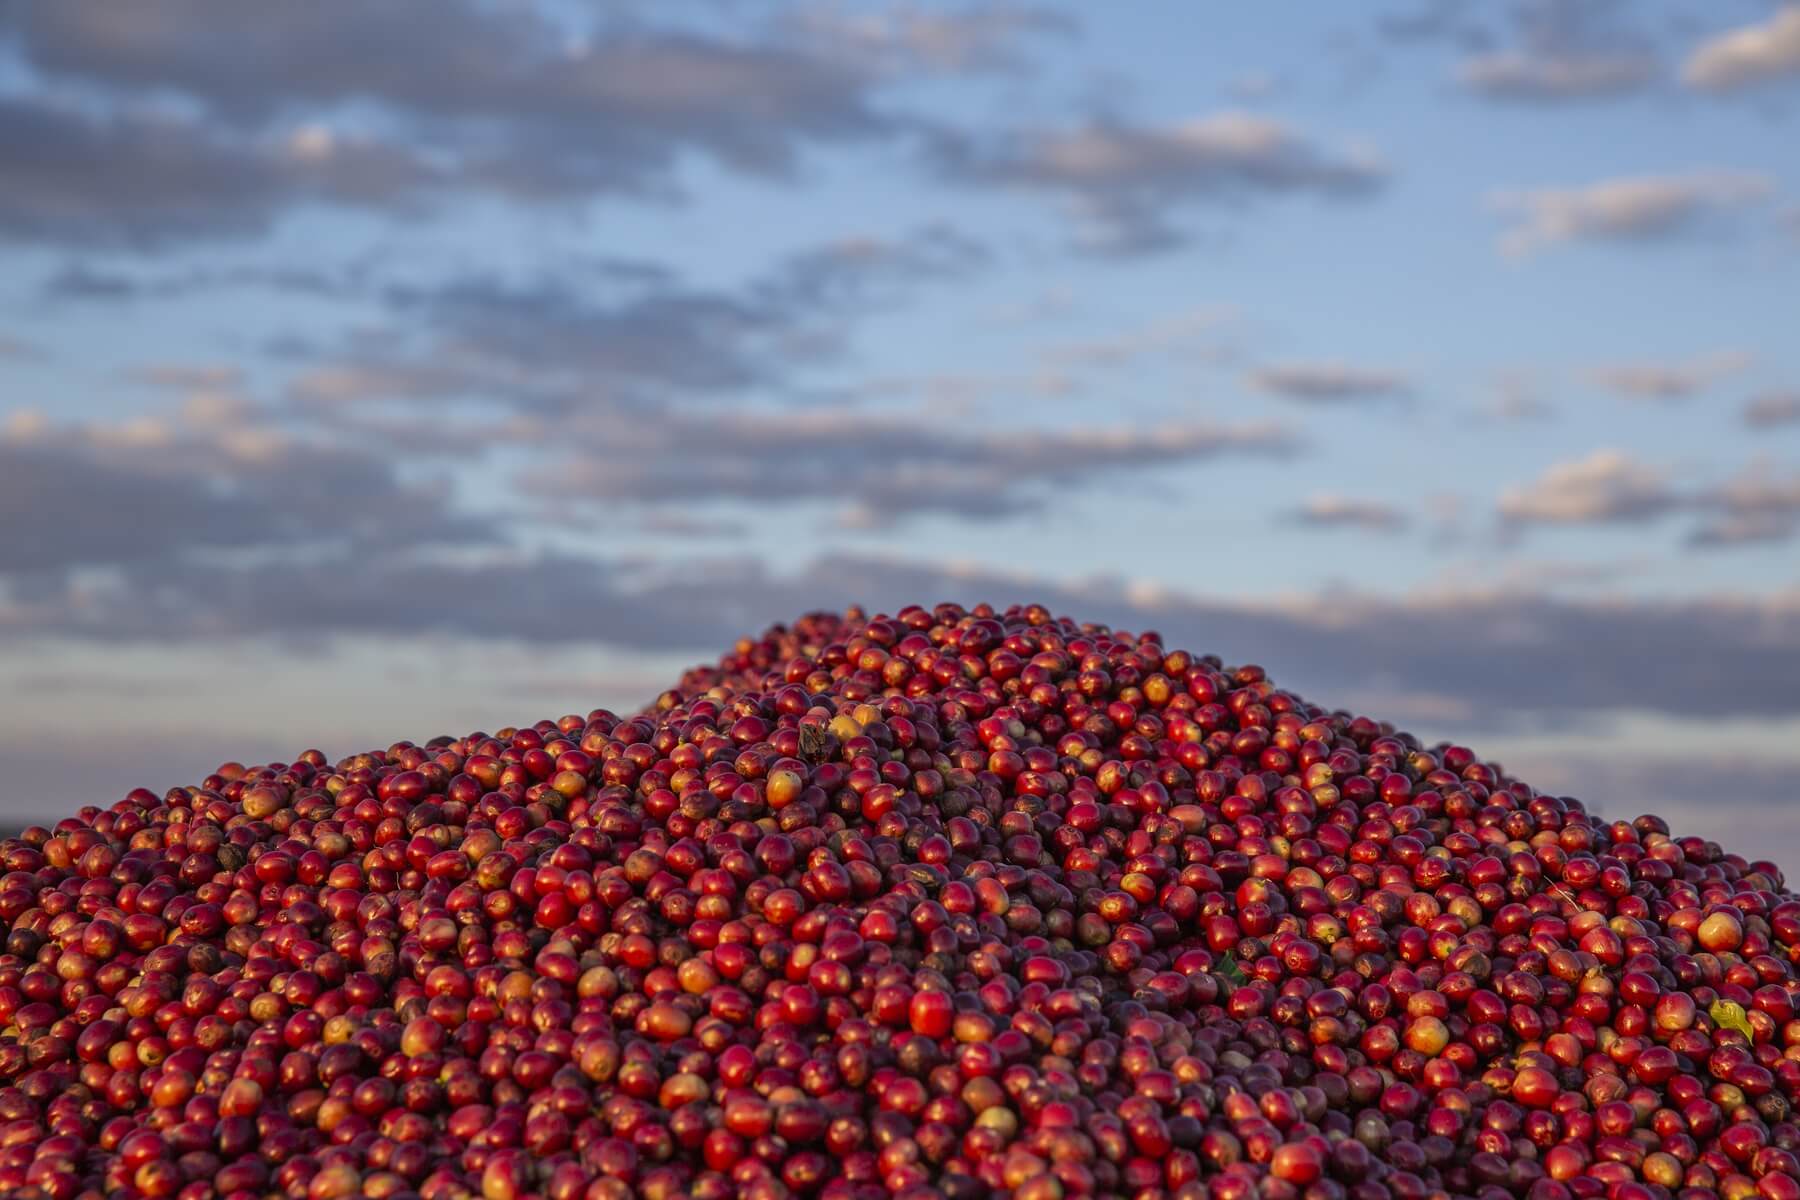 Pile of red coffee beans with sky background